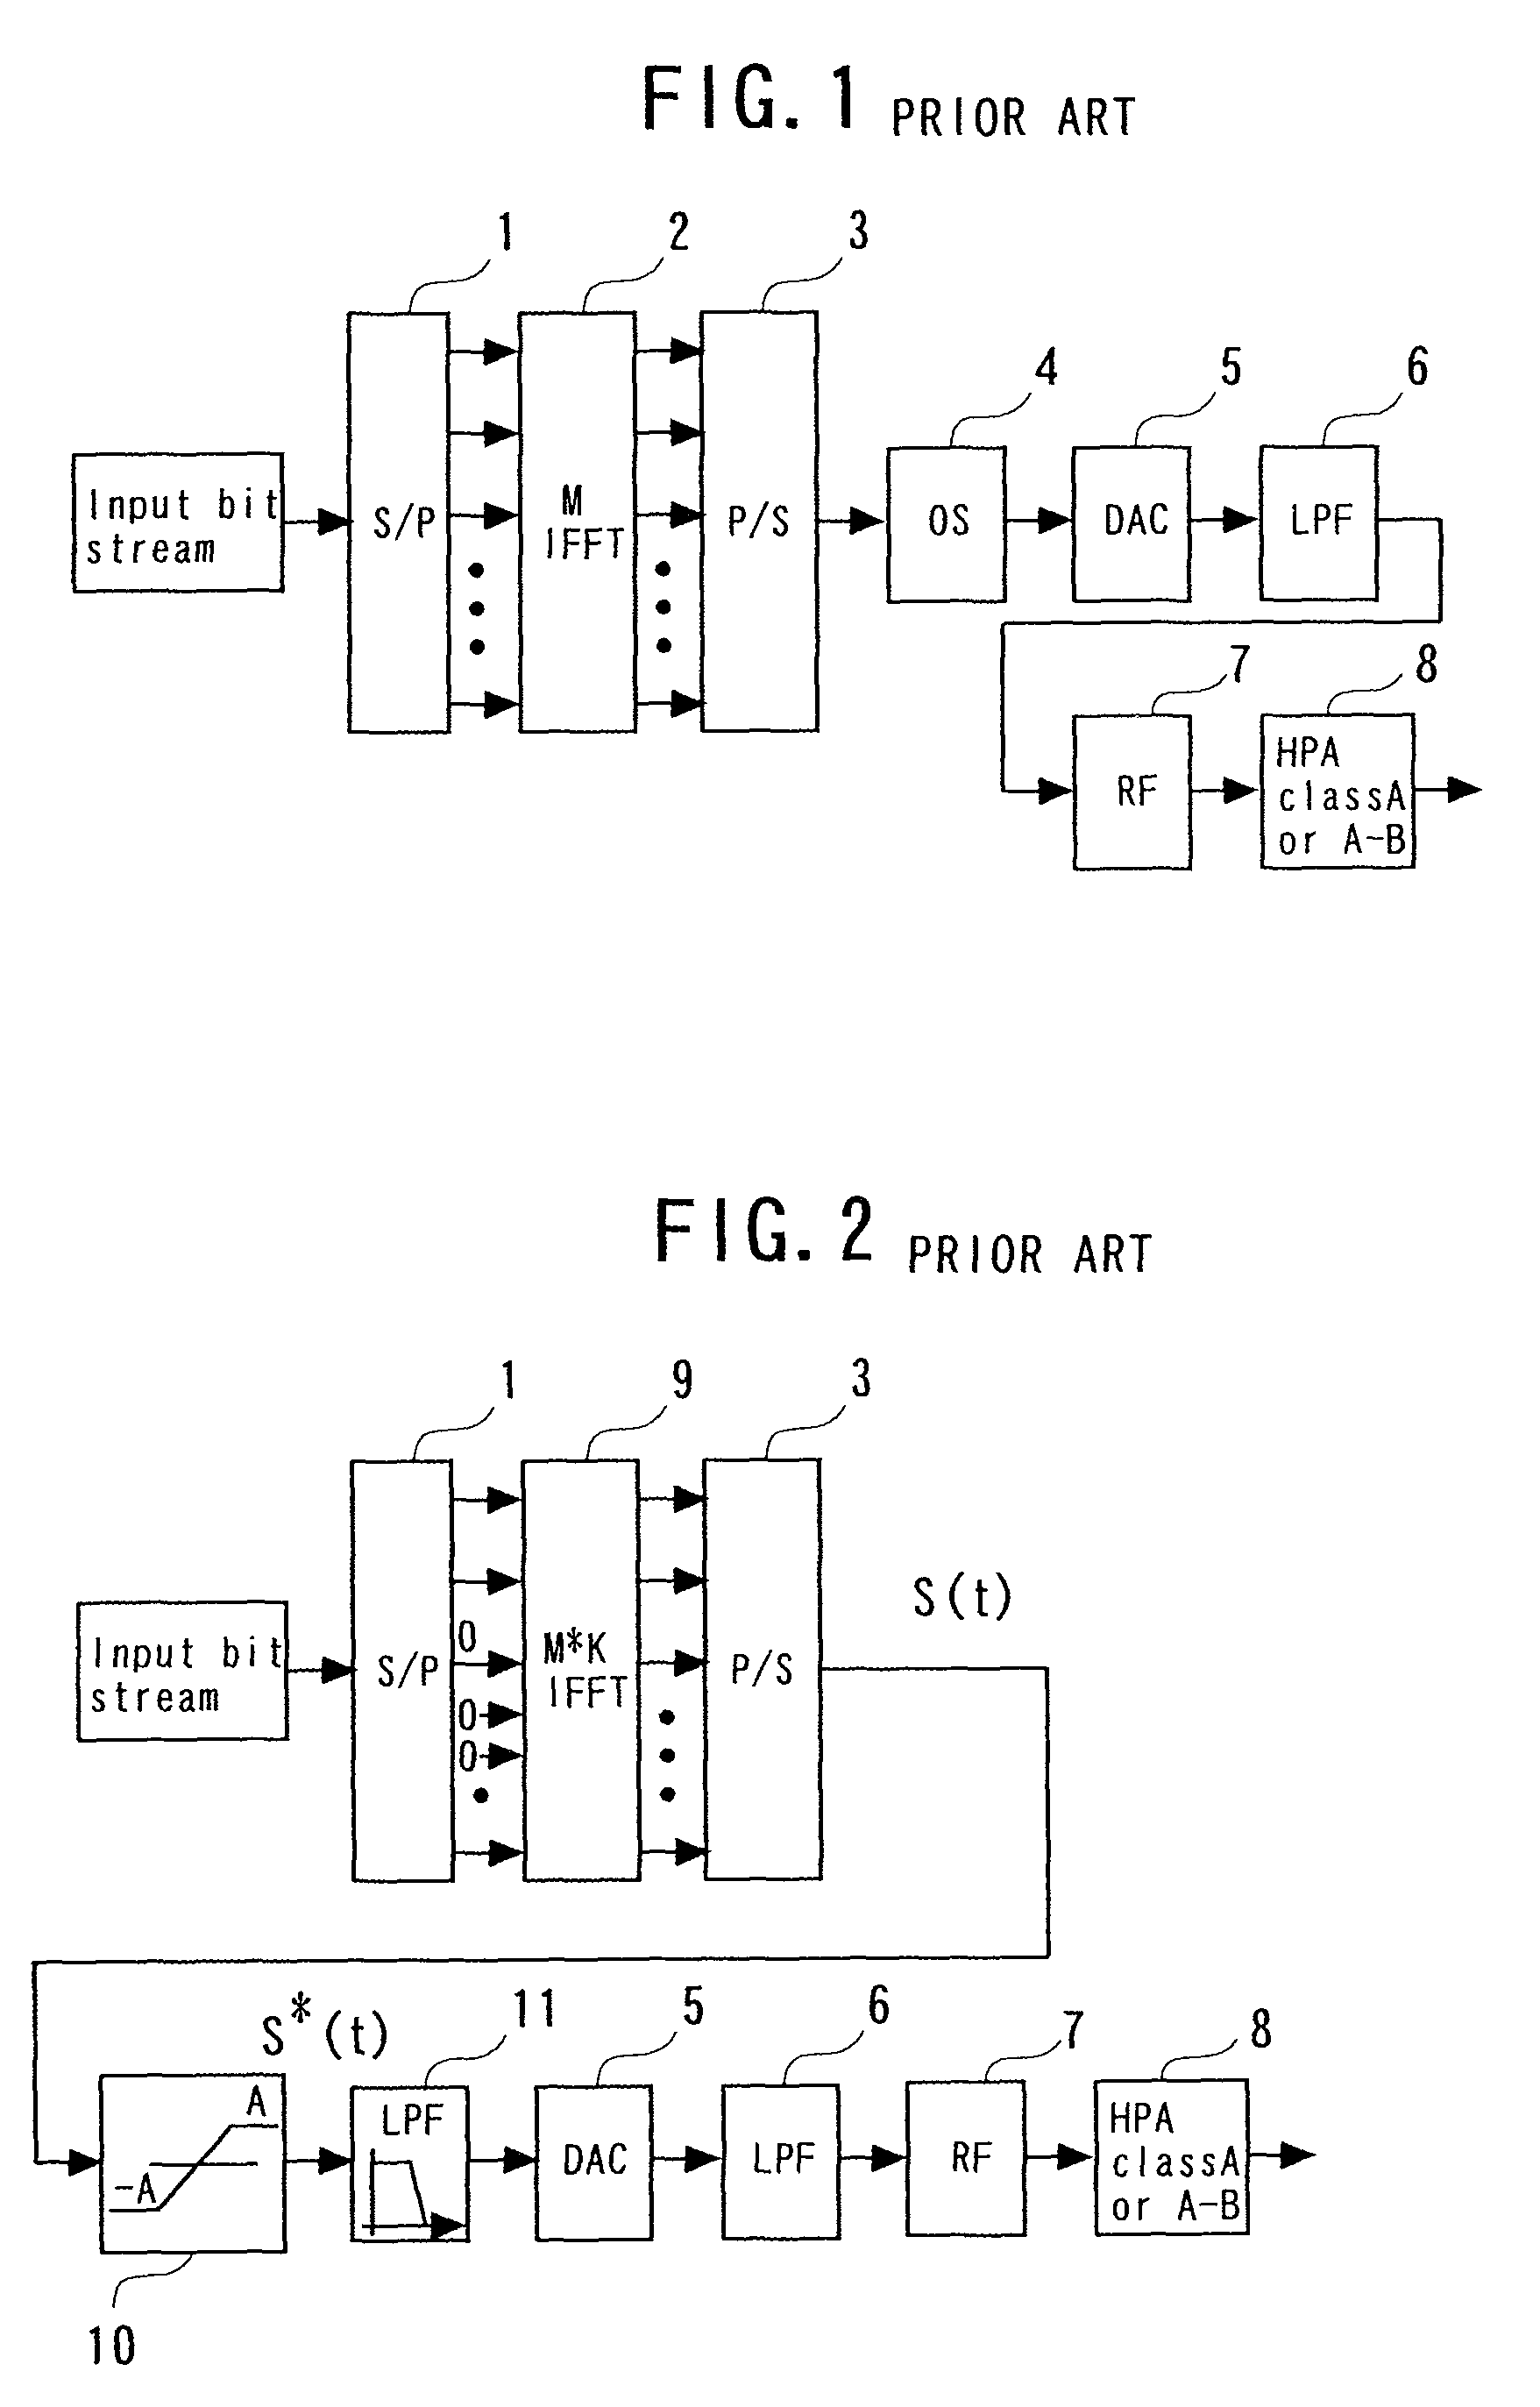 Transmitter for suppressing out-of-band power for a signal